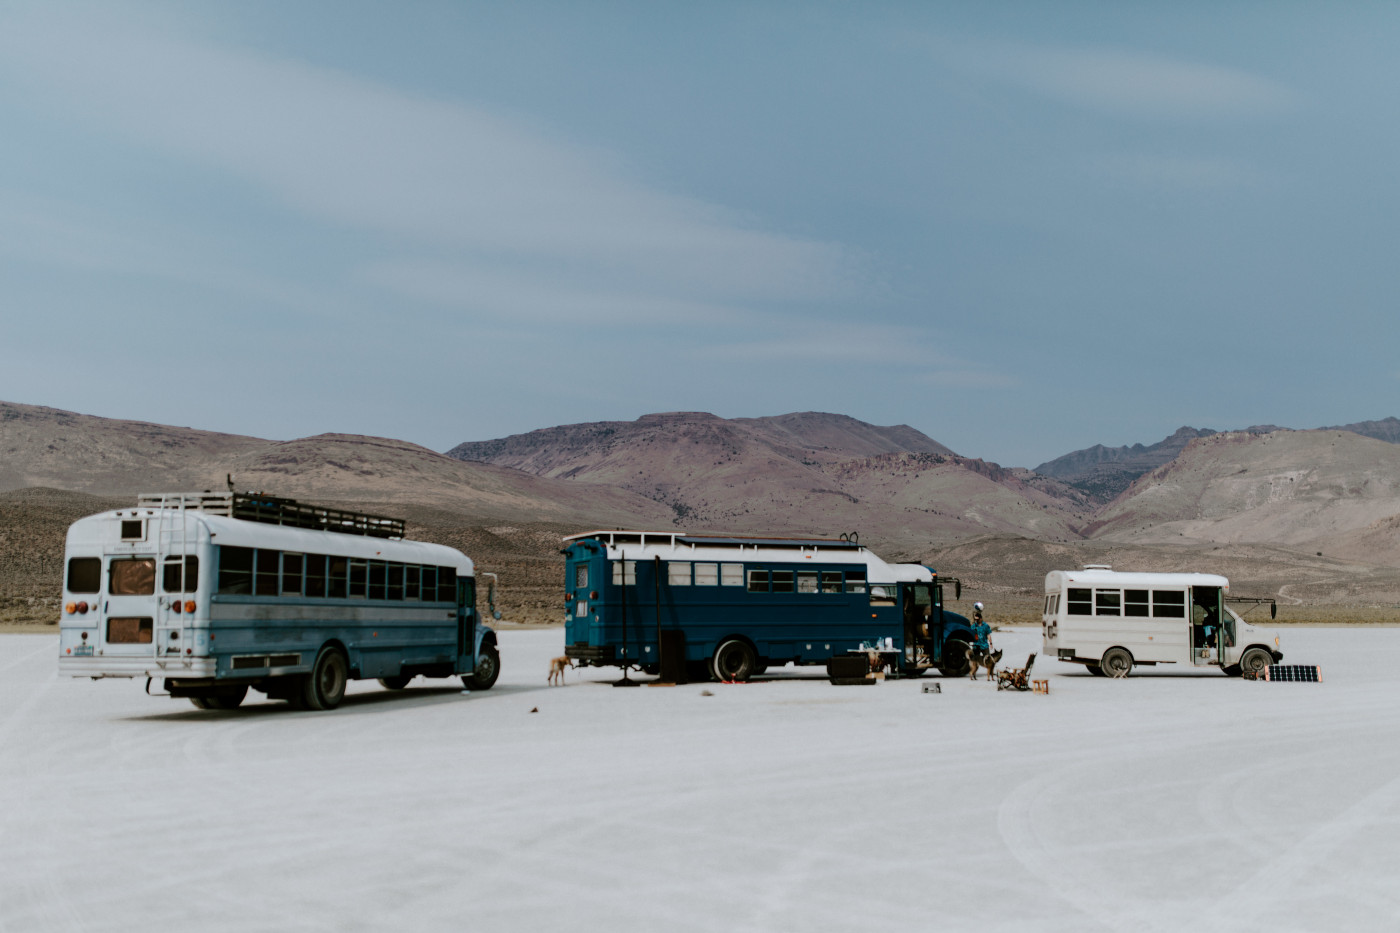 Emerald, Cameron, and their friends drove their converted school bus RVs out to the playa of Alvord Desert in Central Oregon.